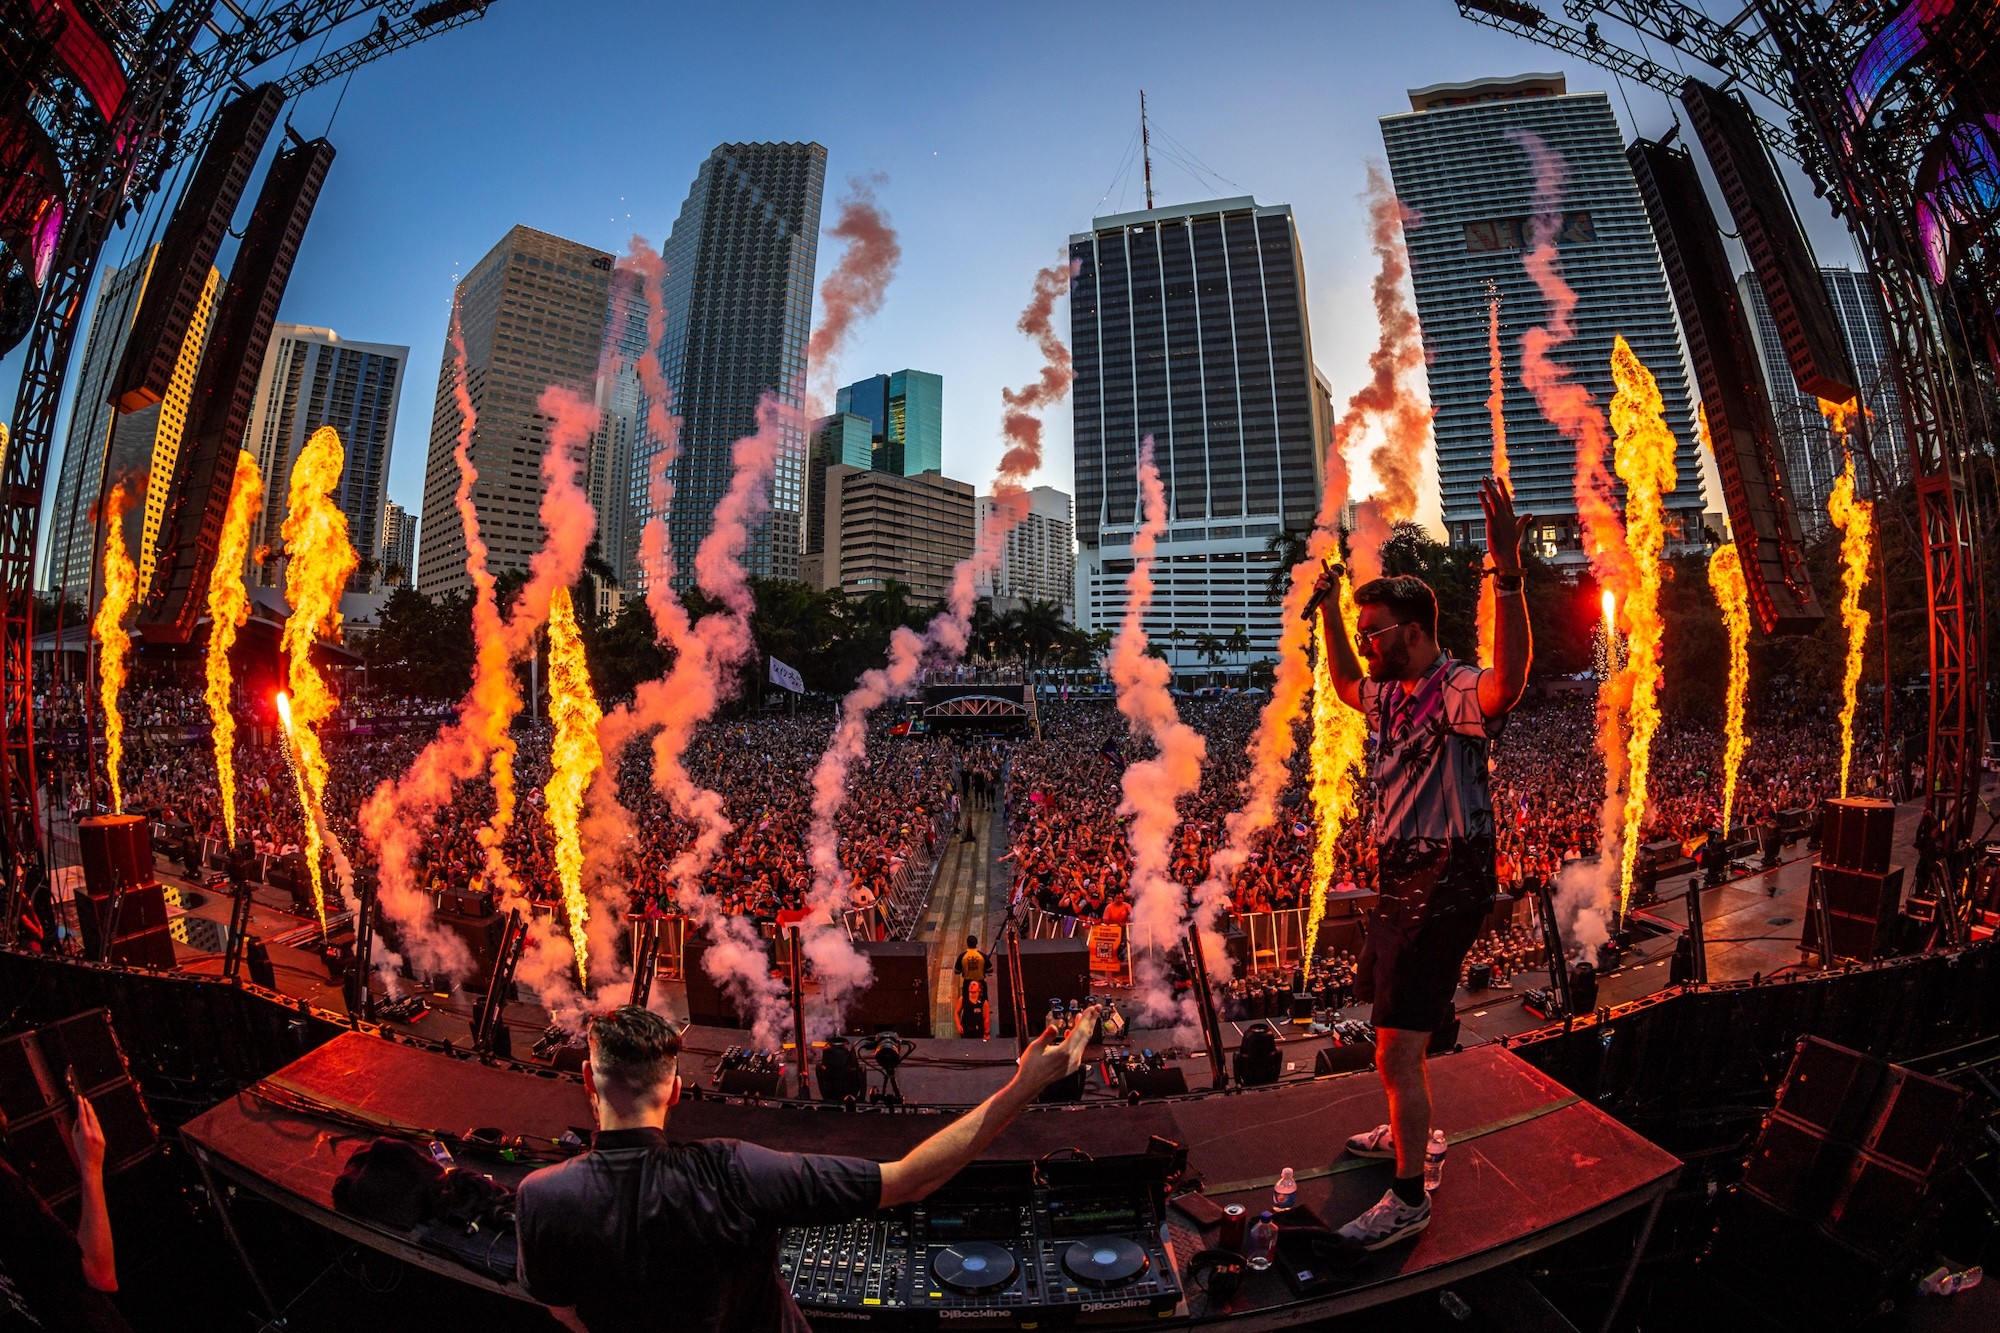 Miami's Ultra Music Festival Cuts Day One Short Due to Severe Weather